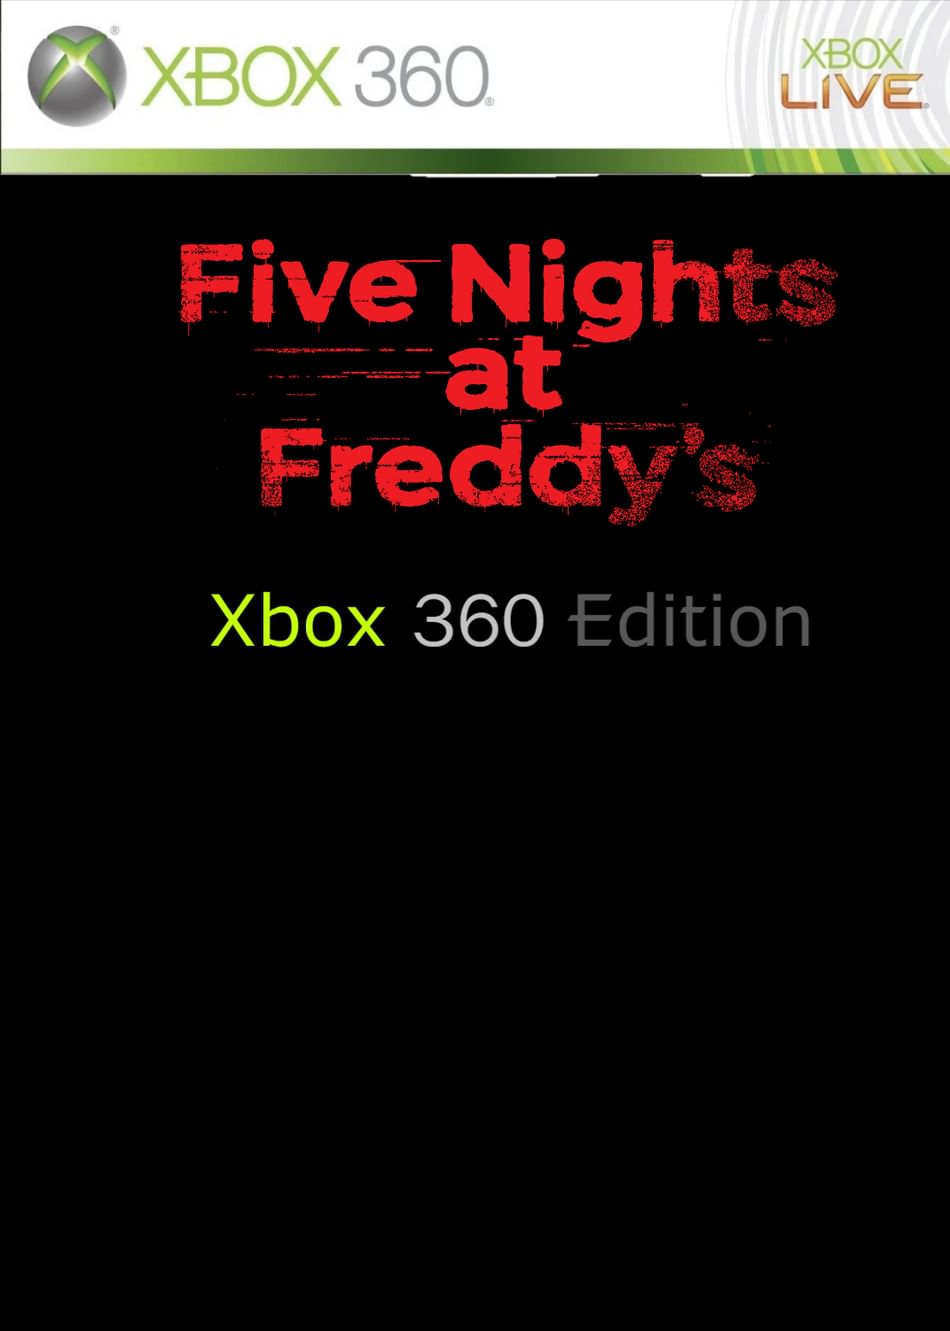 Five Nights at Freddy's Cover (Xbox 360) by Br4zK-L3g3nDv2 on